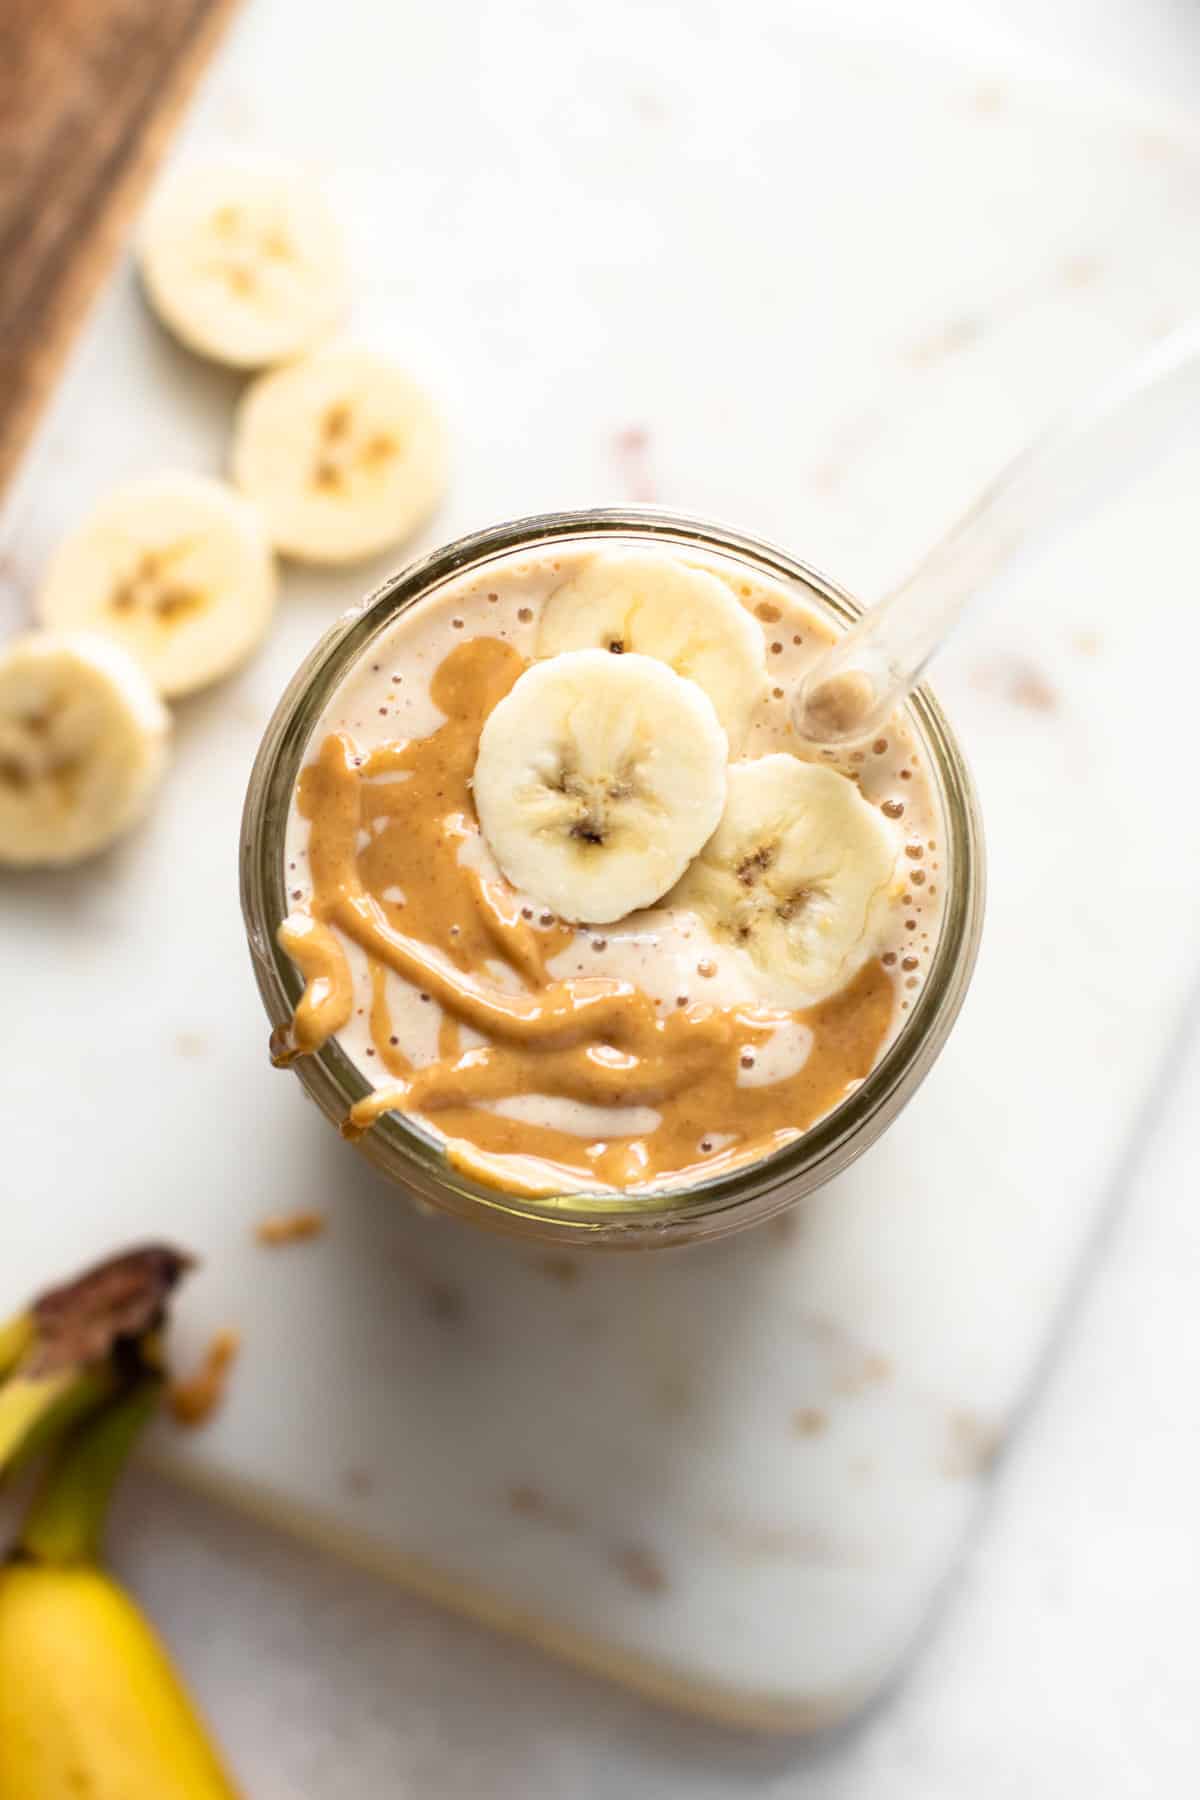 Healthy Peanut Butter Banana Smoothie